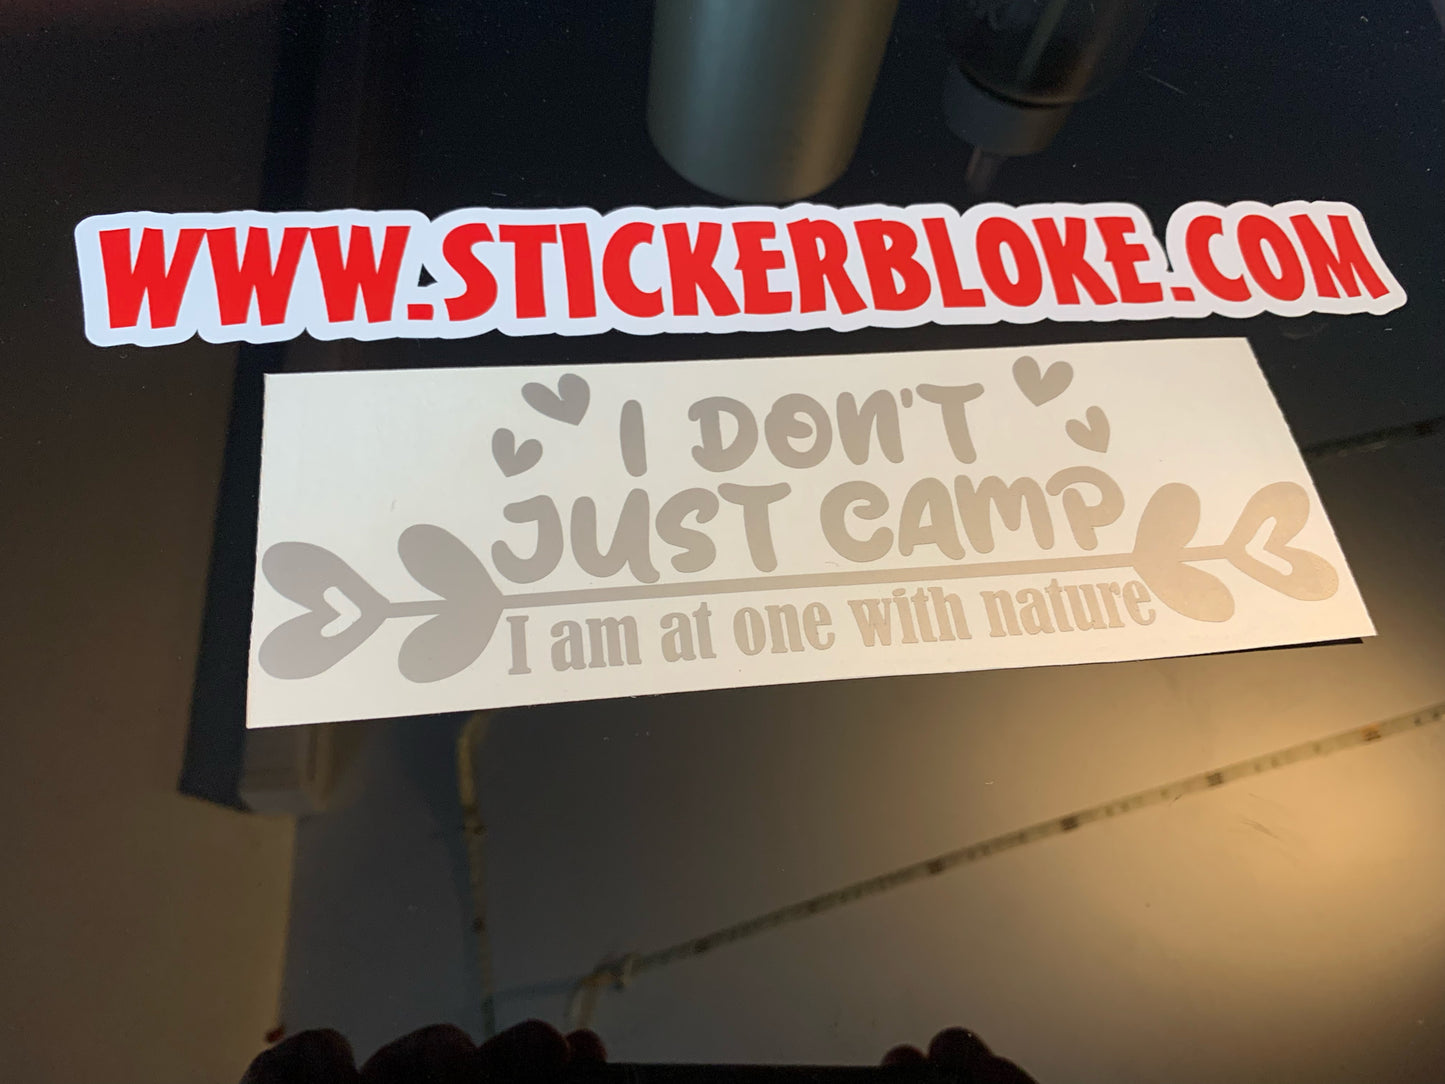 I DONT JUST CAMP I AM AT ONE WITH NATURE STICKER